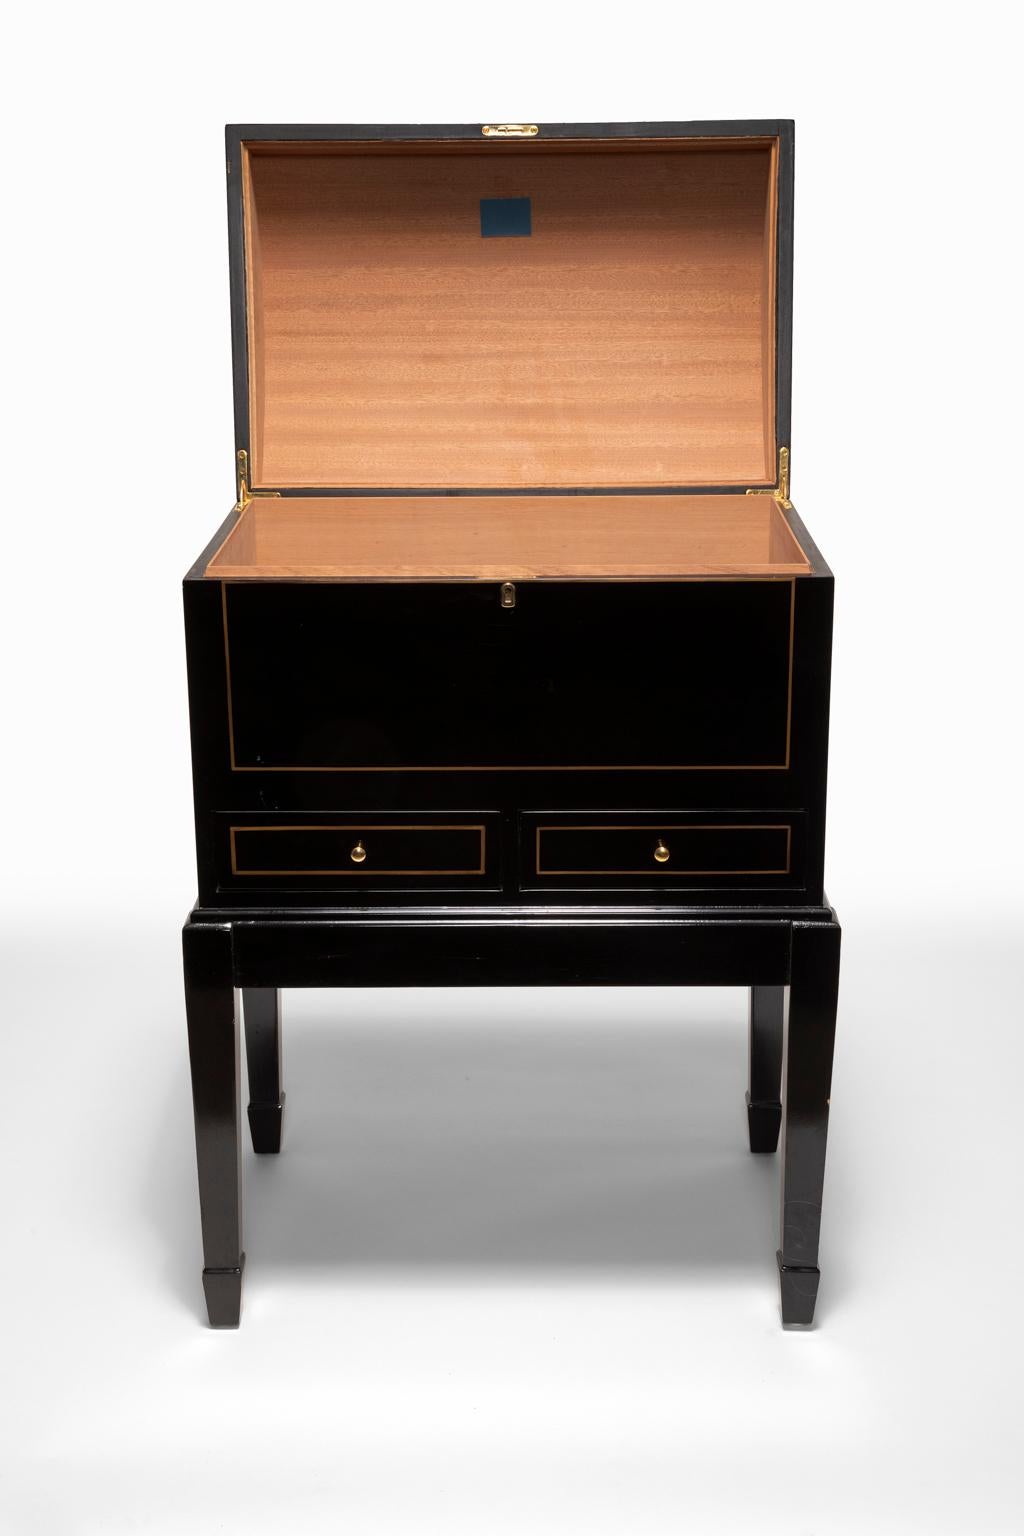 A Montecristo Humidor is the ideal way to always keep favorite select smokes fresh and ready to savor. This chest is designed to safely house cigars for a longtime. This stunning Humidor Cabinet is emblazoned with the Montecristo Crest and carries a